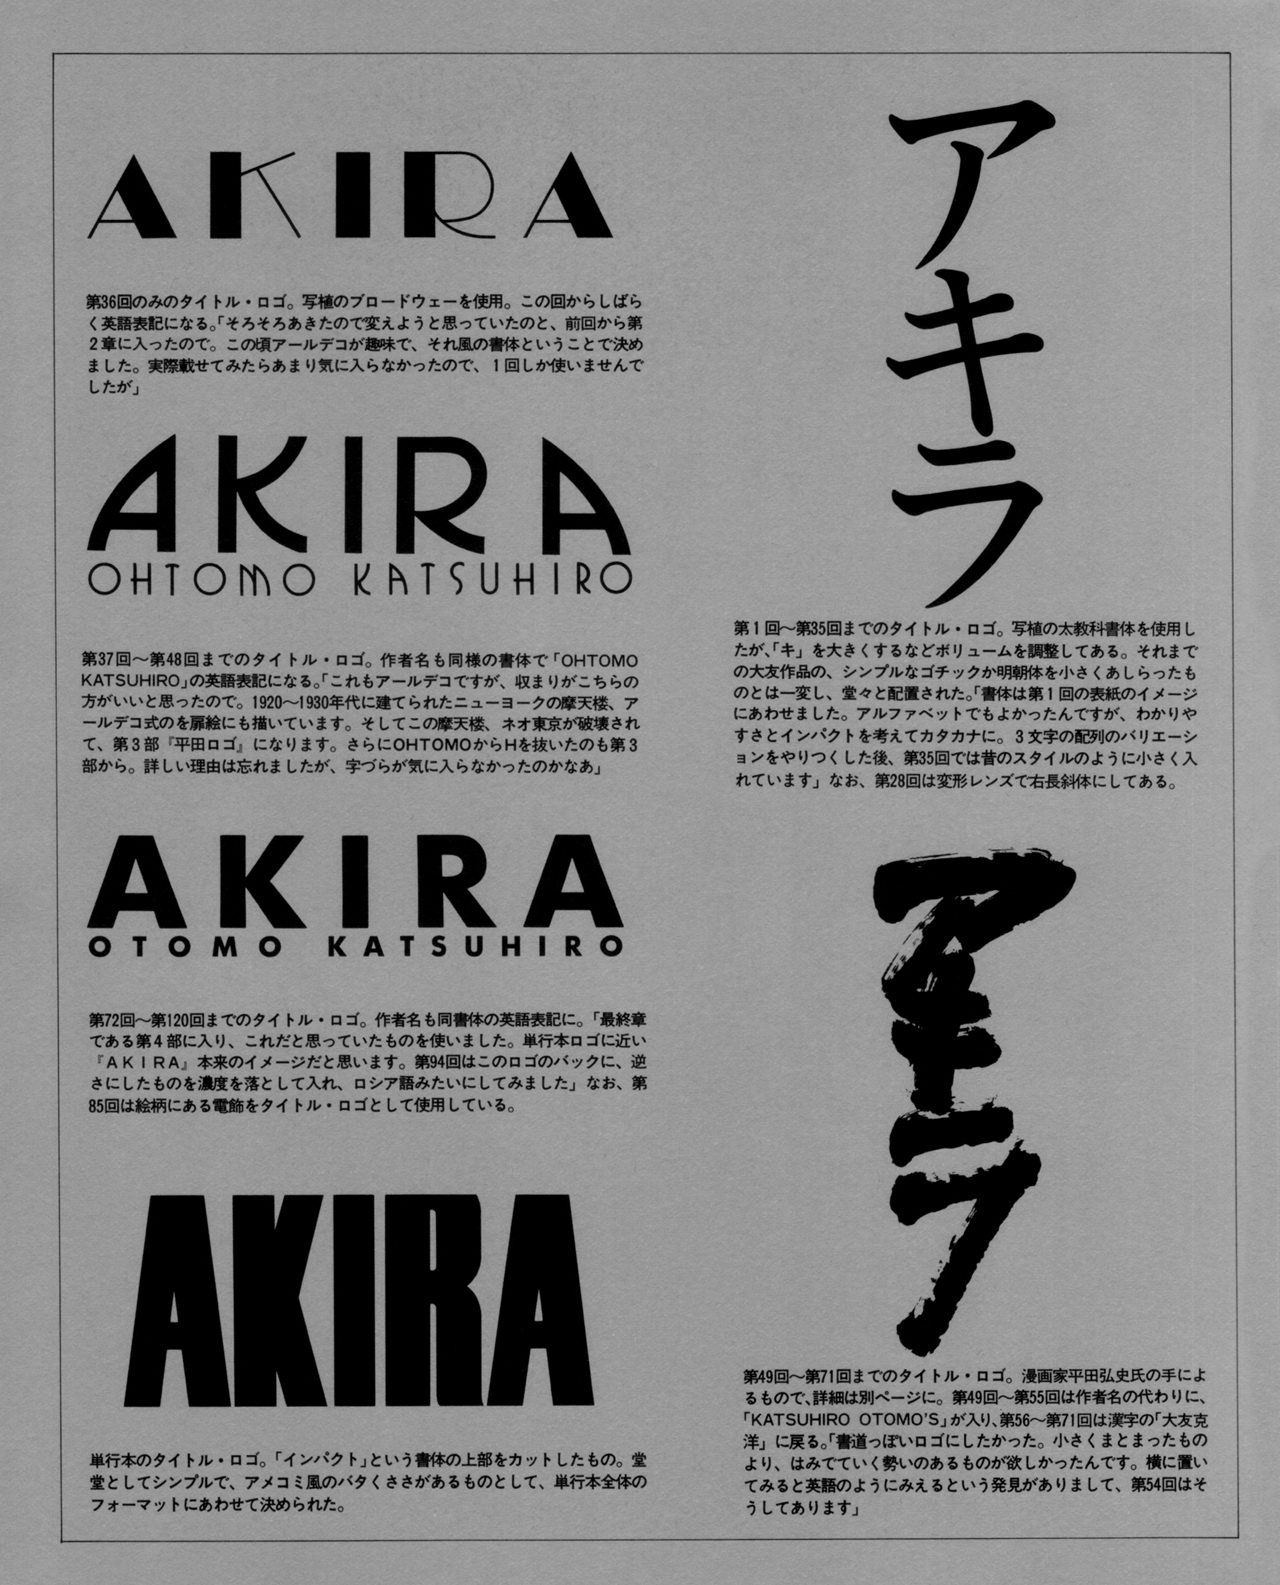 Akira club - The memory of Akira lives on in our hearts! 83